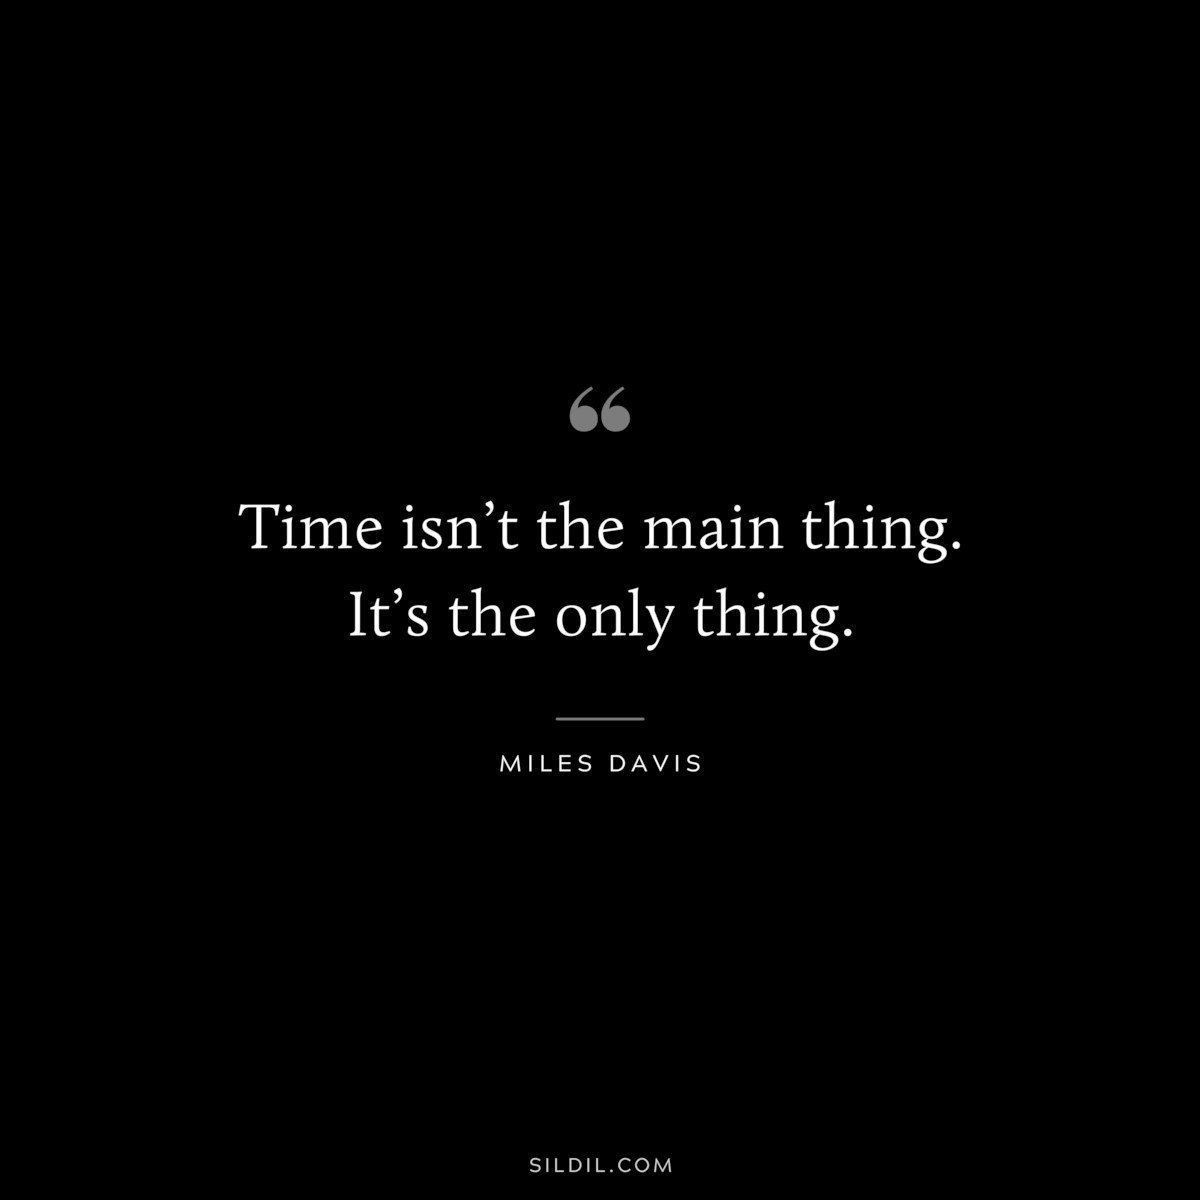 Time isn’t the main thing. It’s the only thing. ― Miles Davis